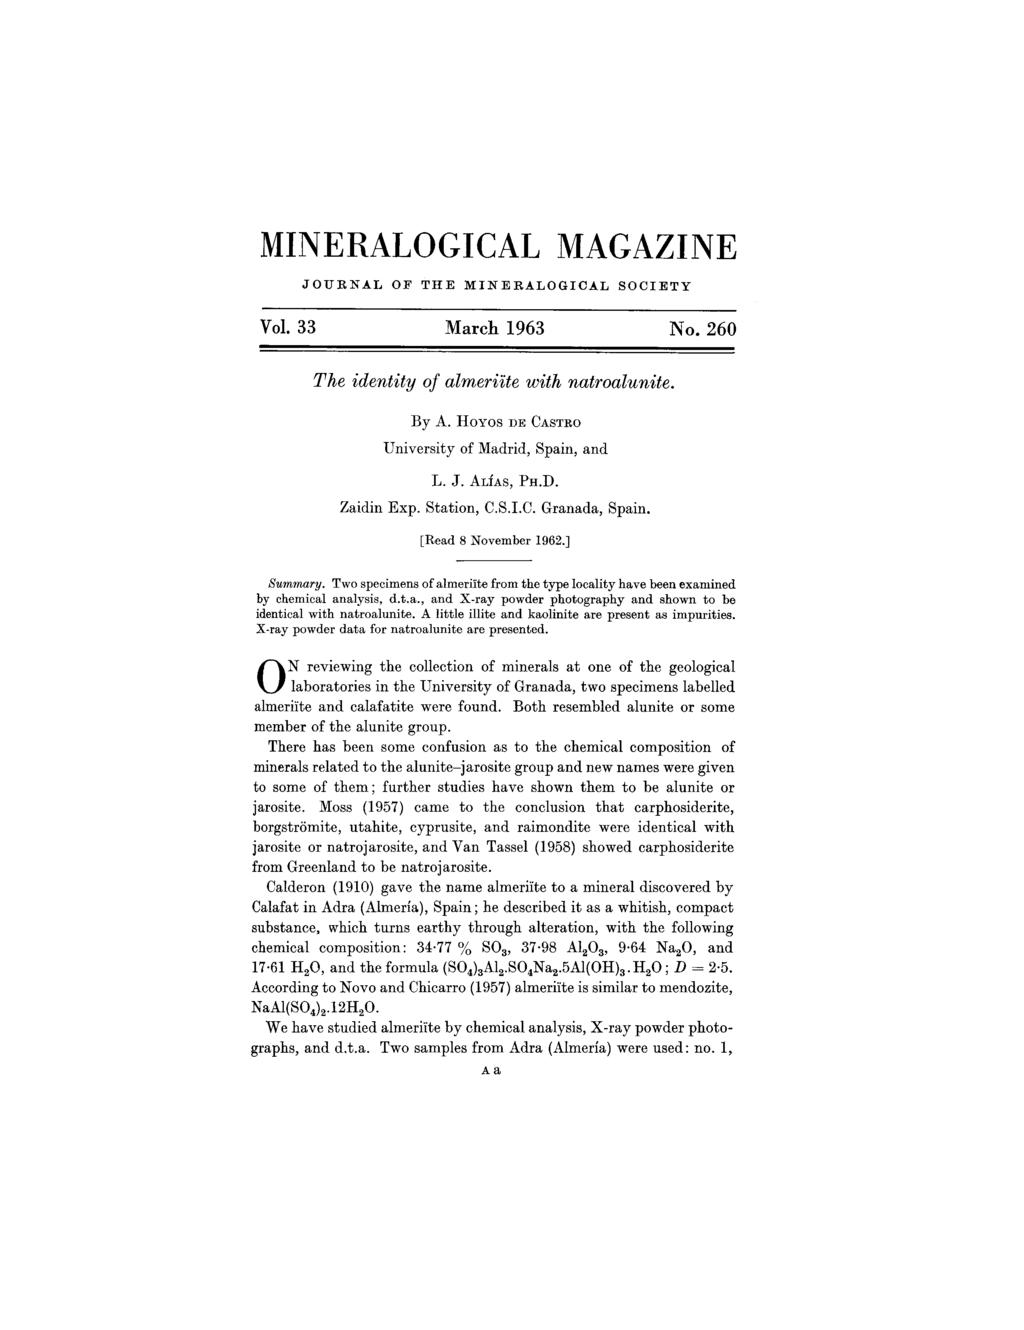 MINERALOGICAL MAGAZINE JOURNAL OF THE MINERALOGICAL SOCIETY Vol. 33 March 1963 No. 260 The identity of almeriite with natroalunite. By A. Hoyos DE CASTRO University of Madrid, Spain, and L. J. ALiAs,PH.